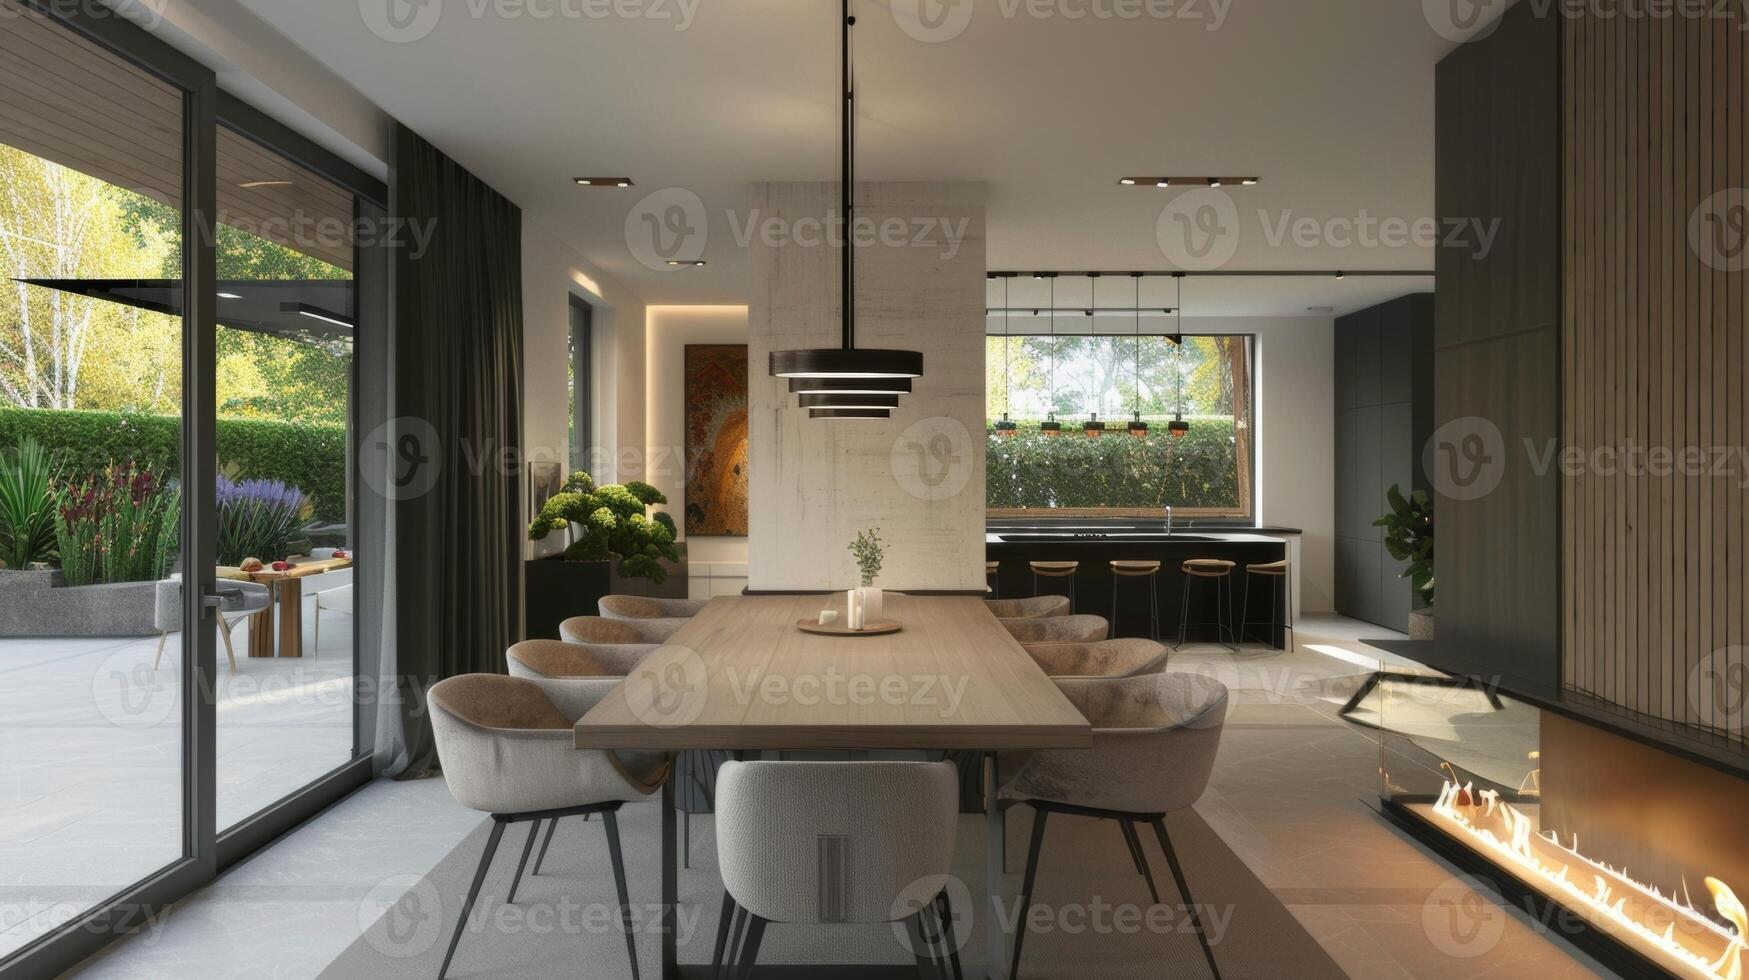 The simple yet elegant design of the fireplace blends seamlessly with the clean lines and neutral color scheme of the dining room. 2d flat cartoon photo